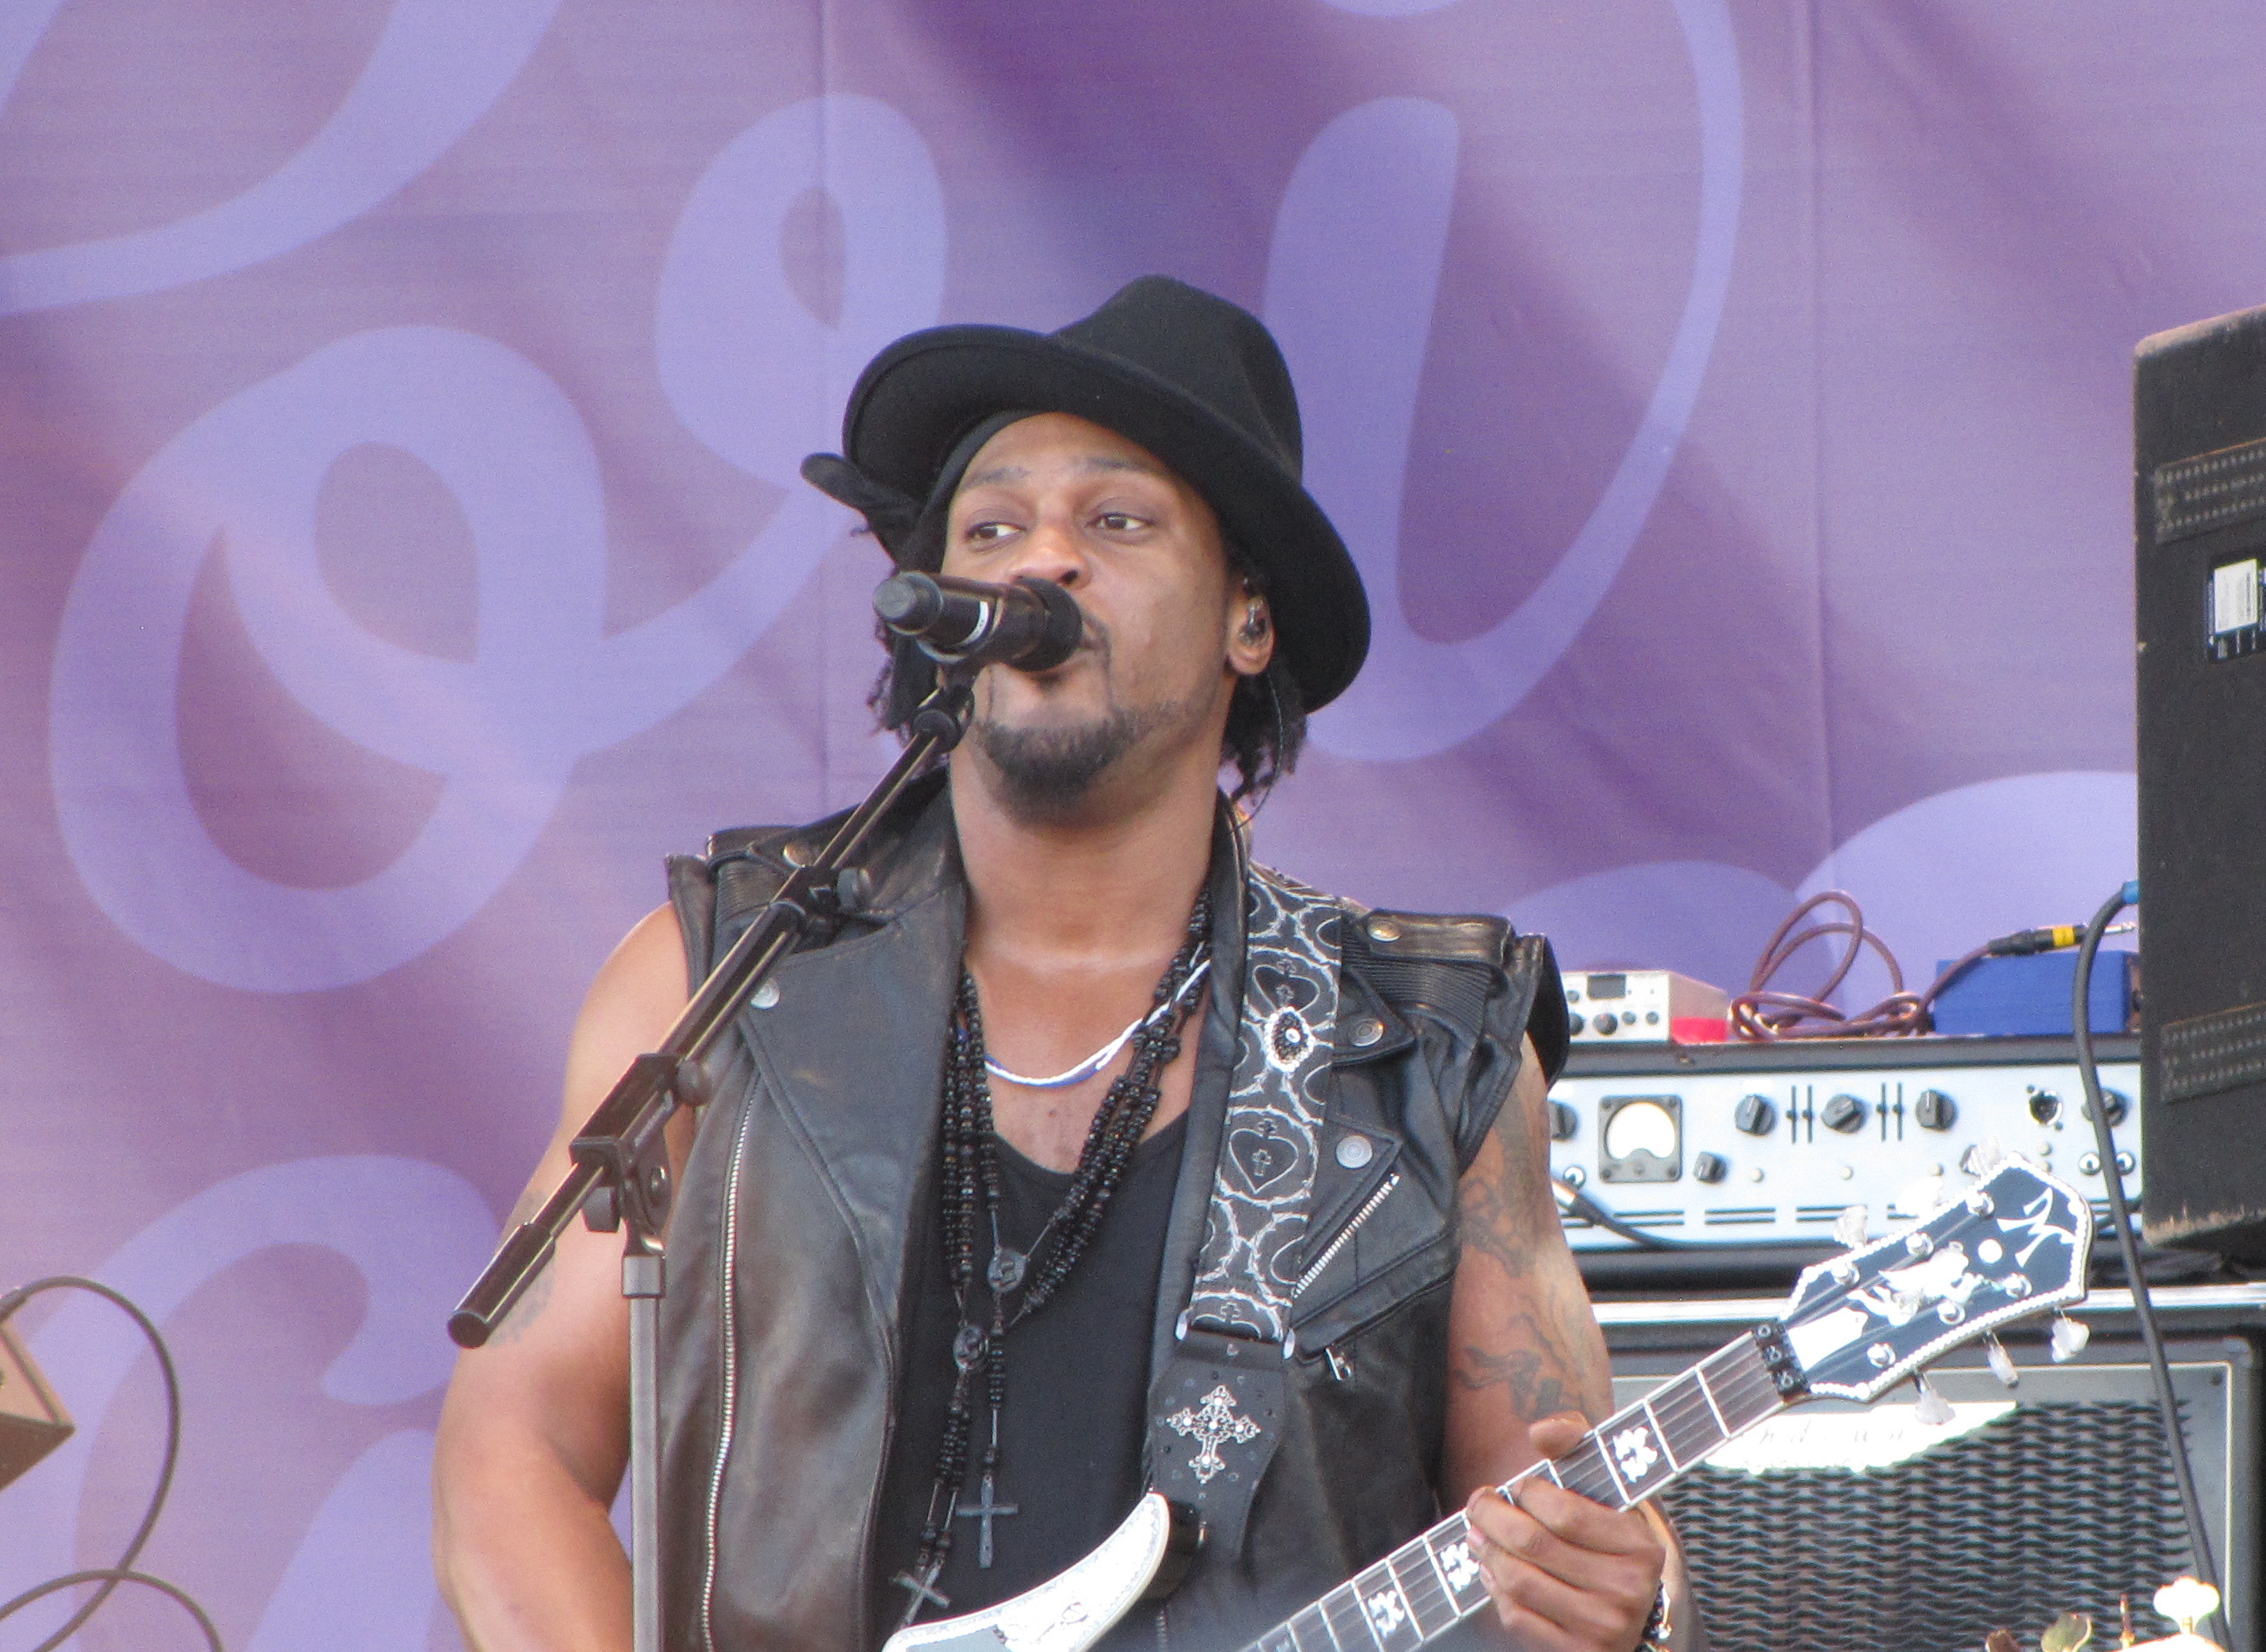 D’Angelo and The Vanguard – “Sugah Daddy” (Audio)